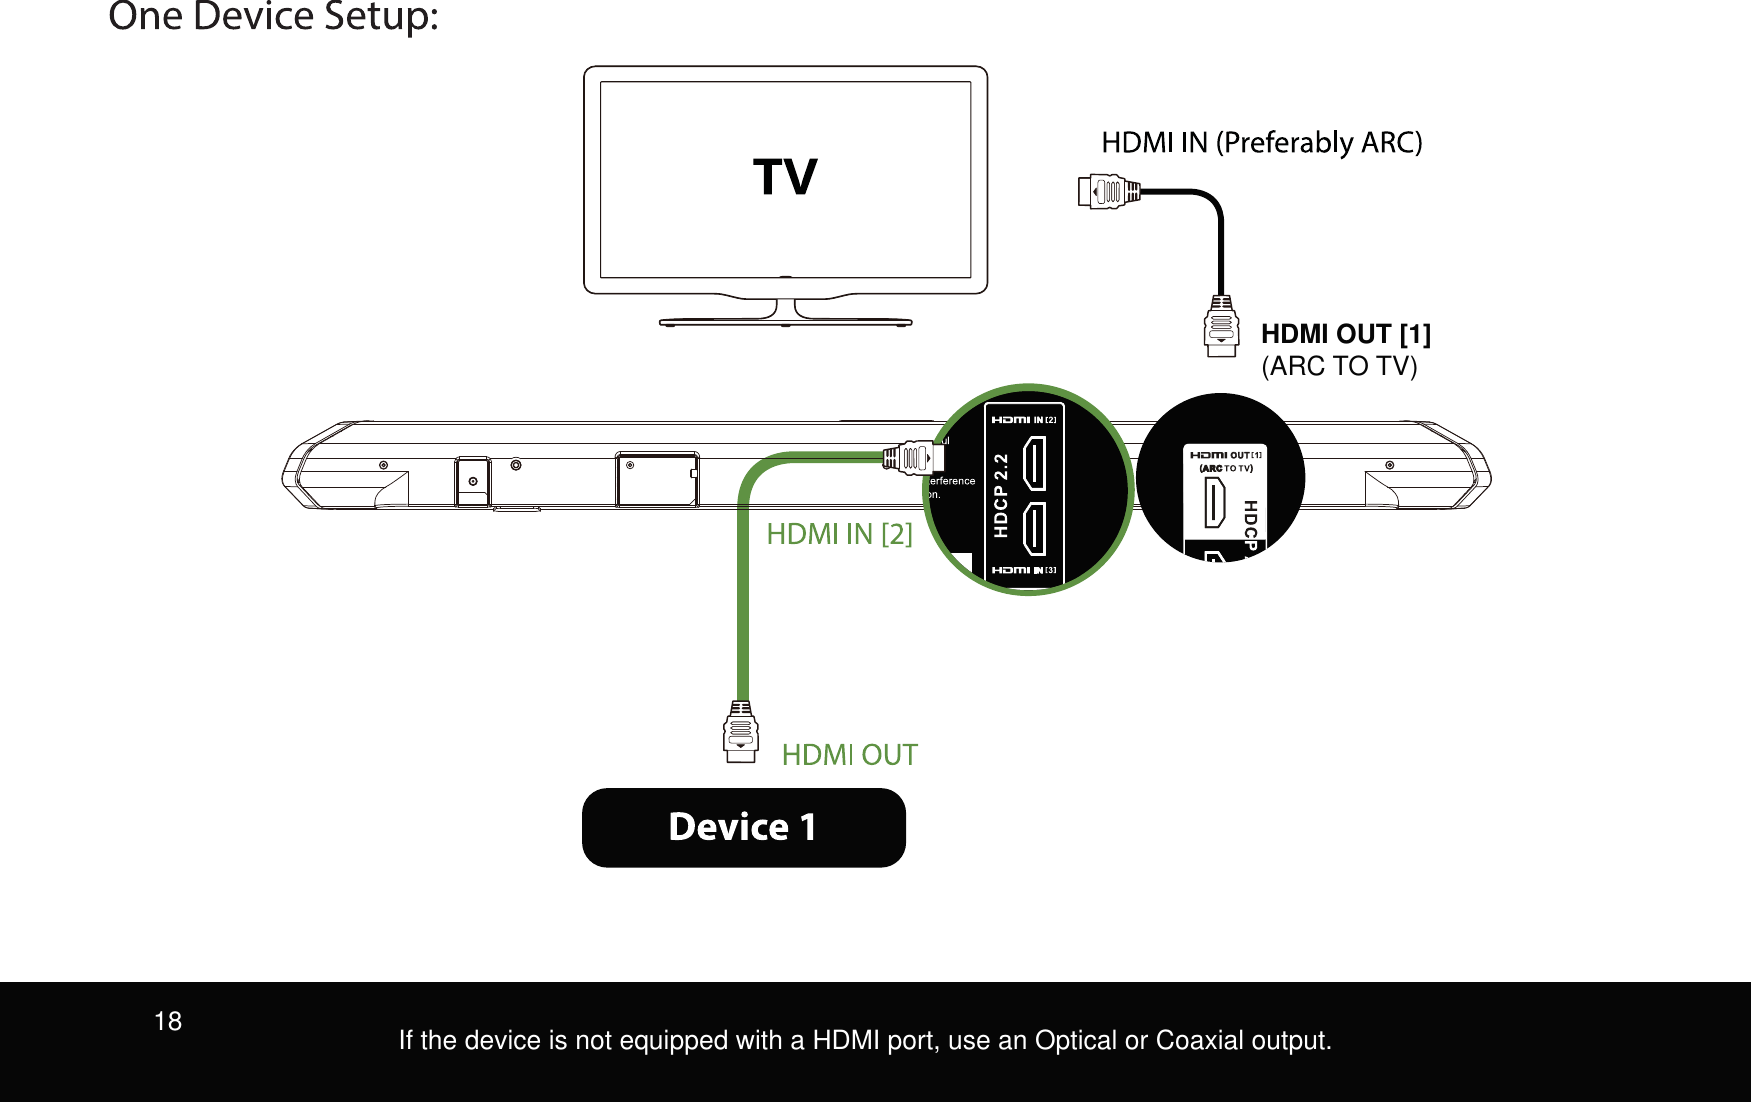 HDMI OUT [1] (ARC TO TV)If the device is not equipped with a HDMI port, use an Optical or Coaxial output.18